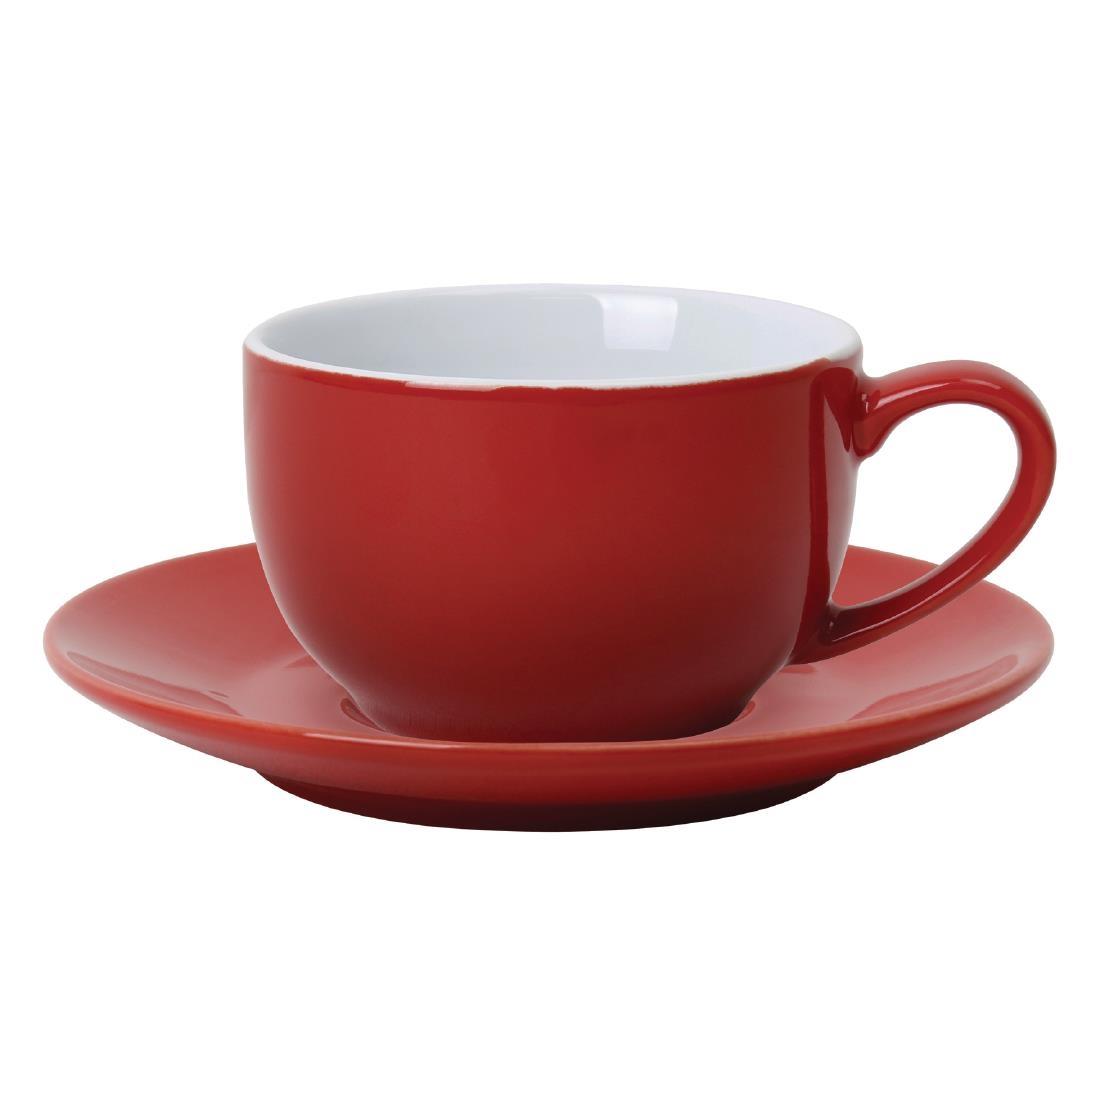 Olympia Cafe Coffee Cups Red 228ml (Pack of 12) - GK073  - 2